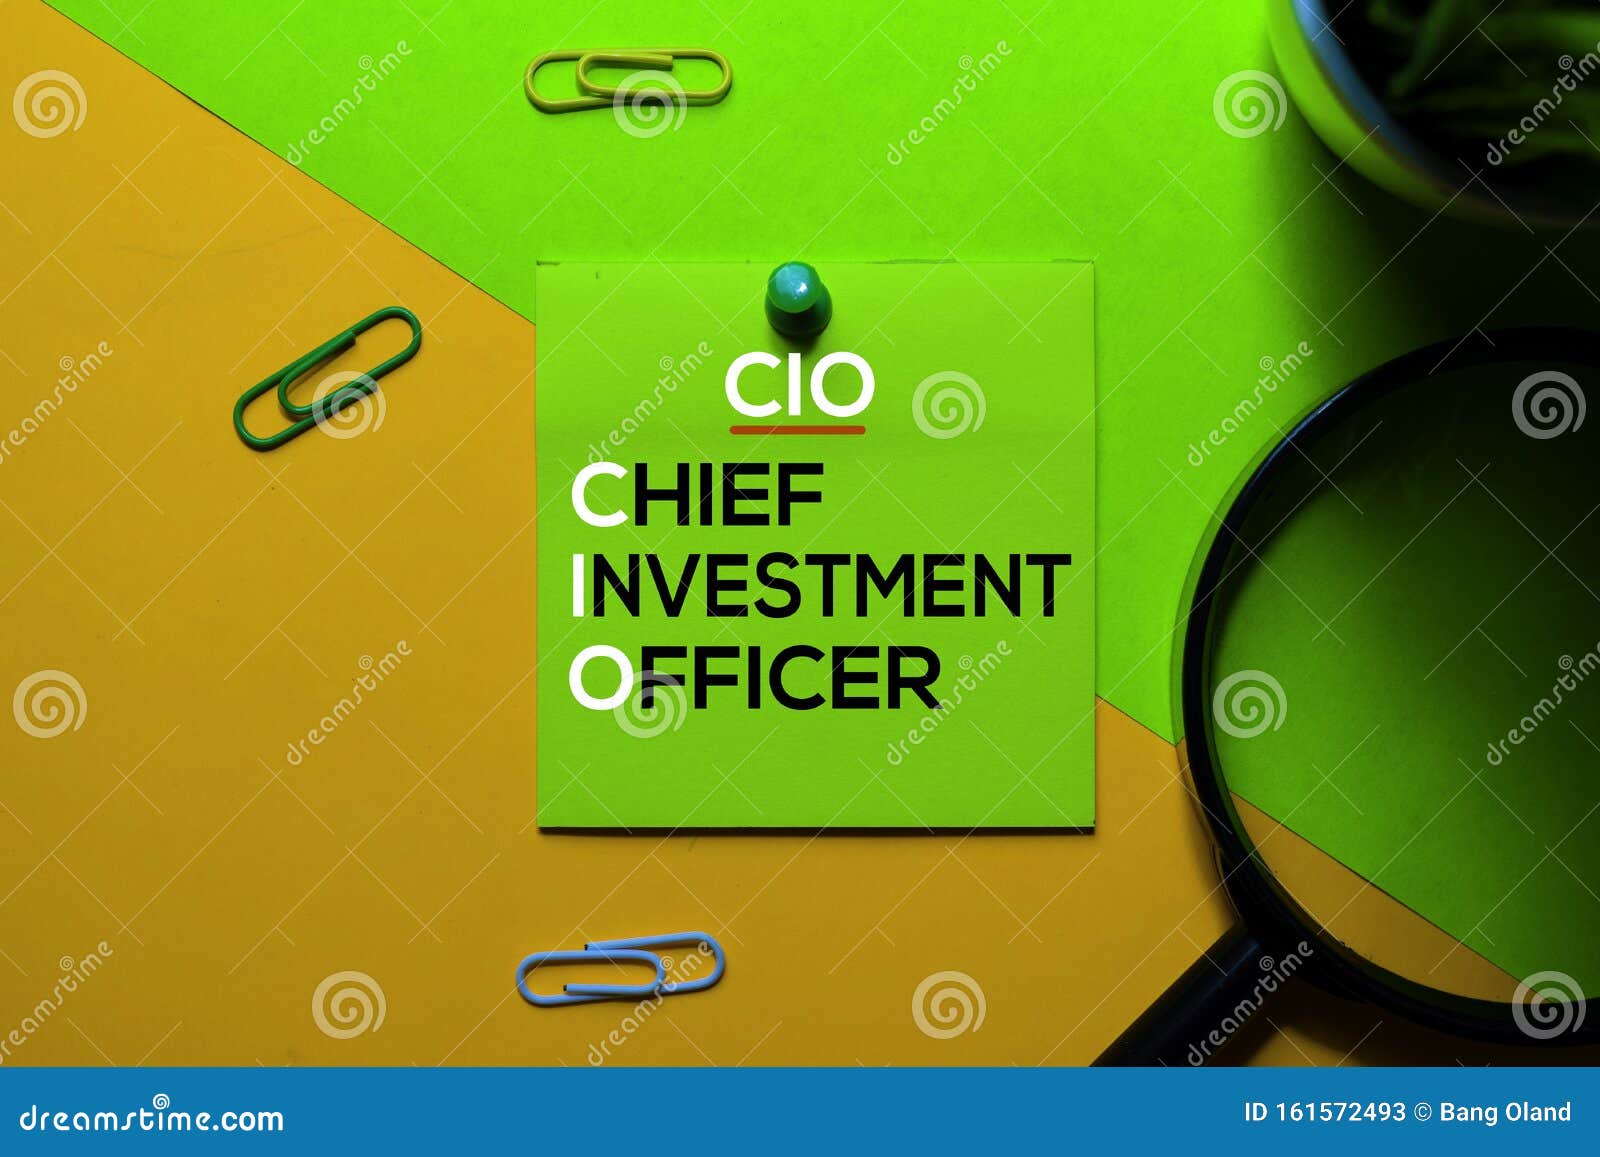 Cio Chief Investment Officer Acronym On Sticky Notes Office Desk